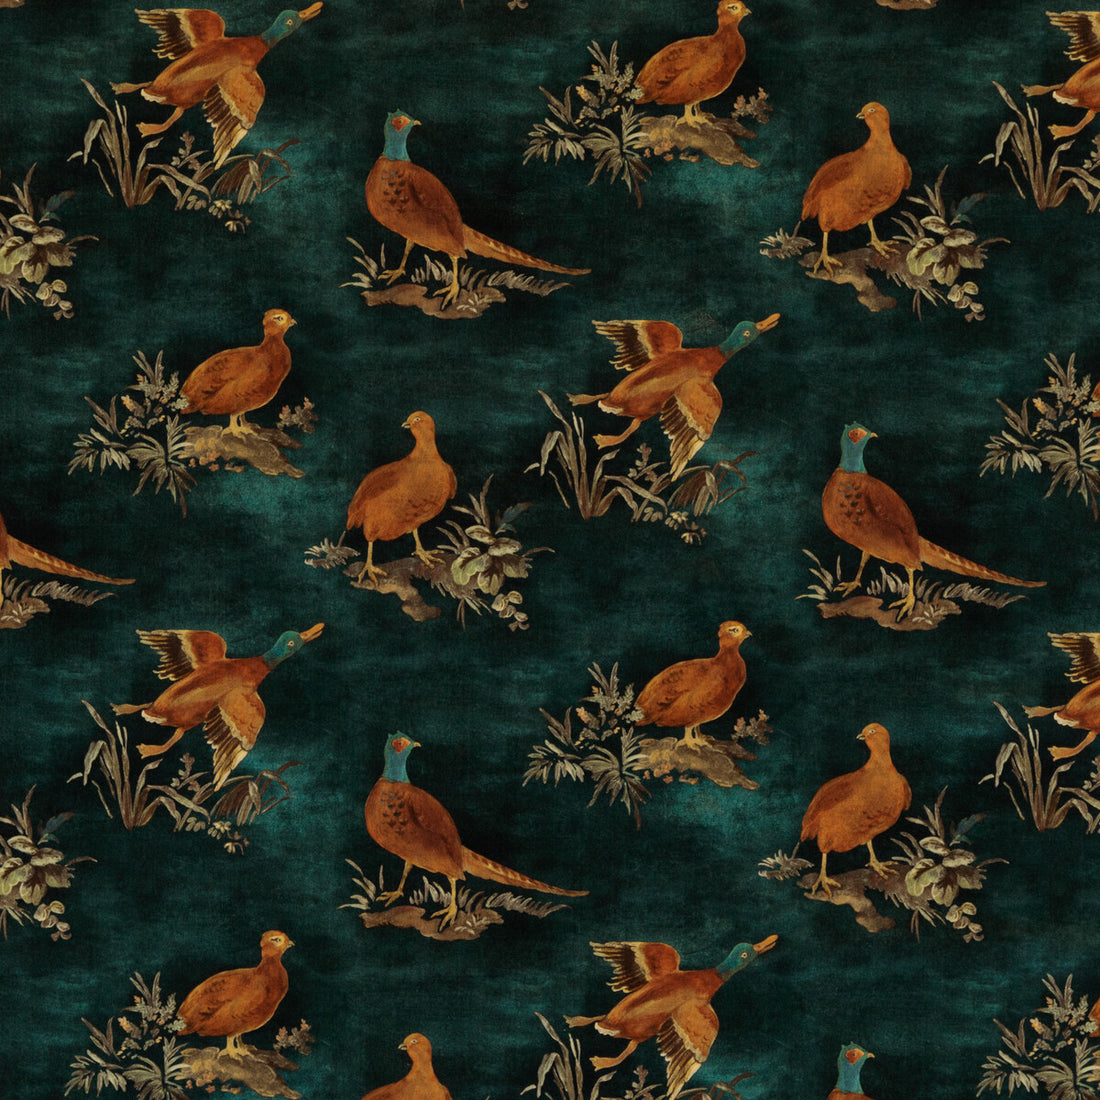 Game Show fabric in teal color - pattern FD316.R122.0 - by Mulberry in the Modern Country Velvets collection